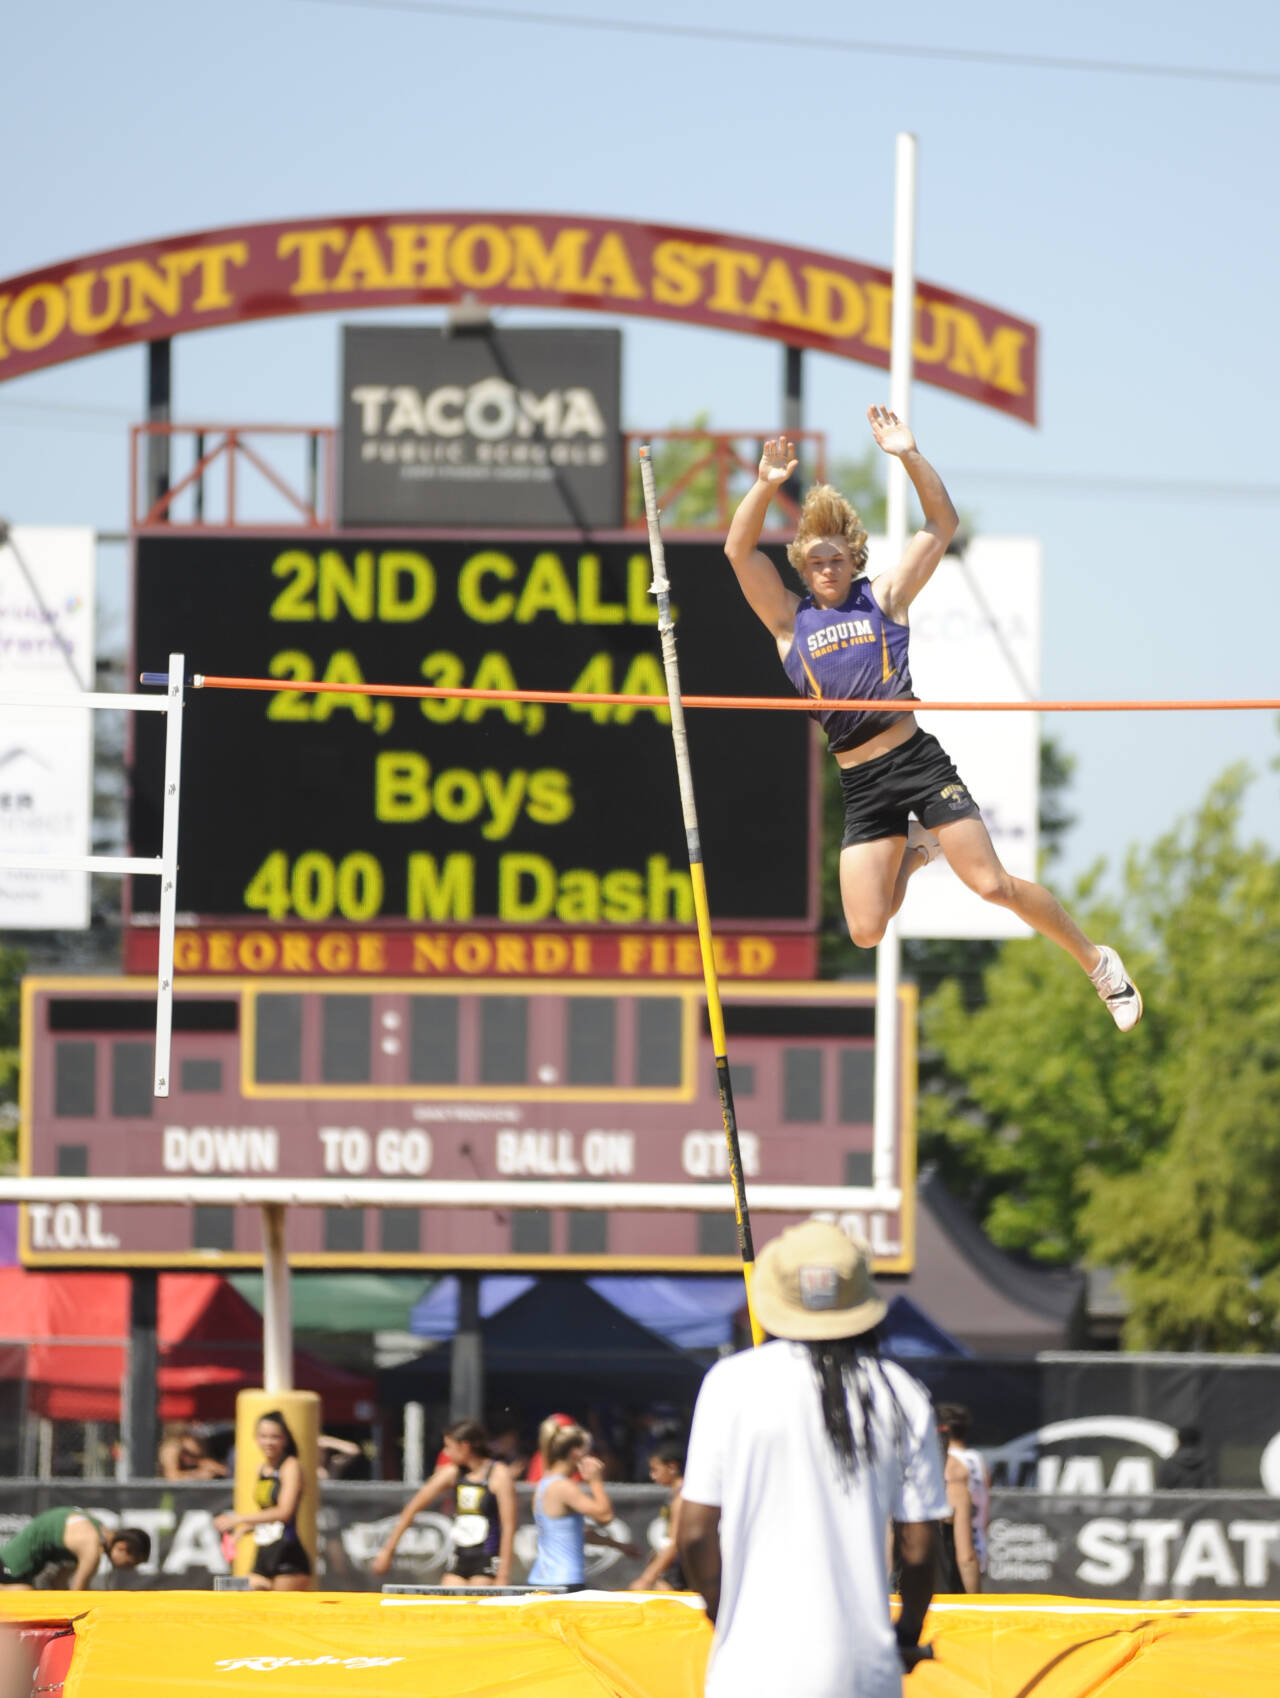 Sequim Gazette photoS by Michael Dashiell
Sequim High senior Mirek Skov clears an early height on his way to a second place finish at the Class 2A state track and field championships in Tacoma on May 26.